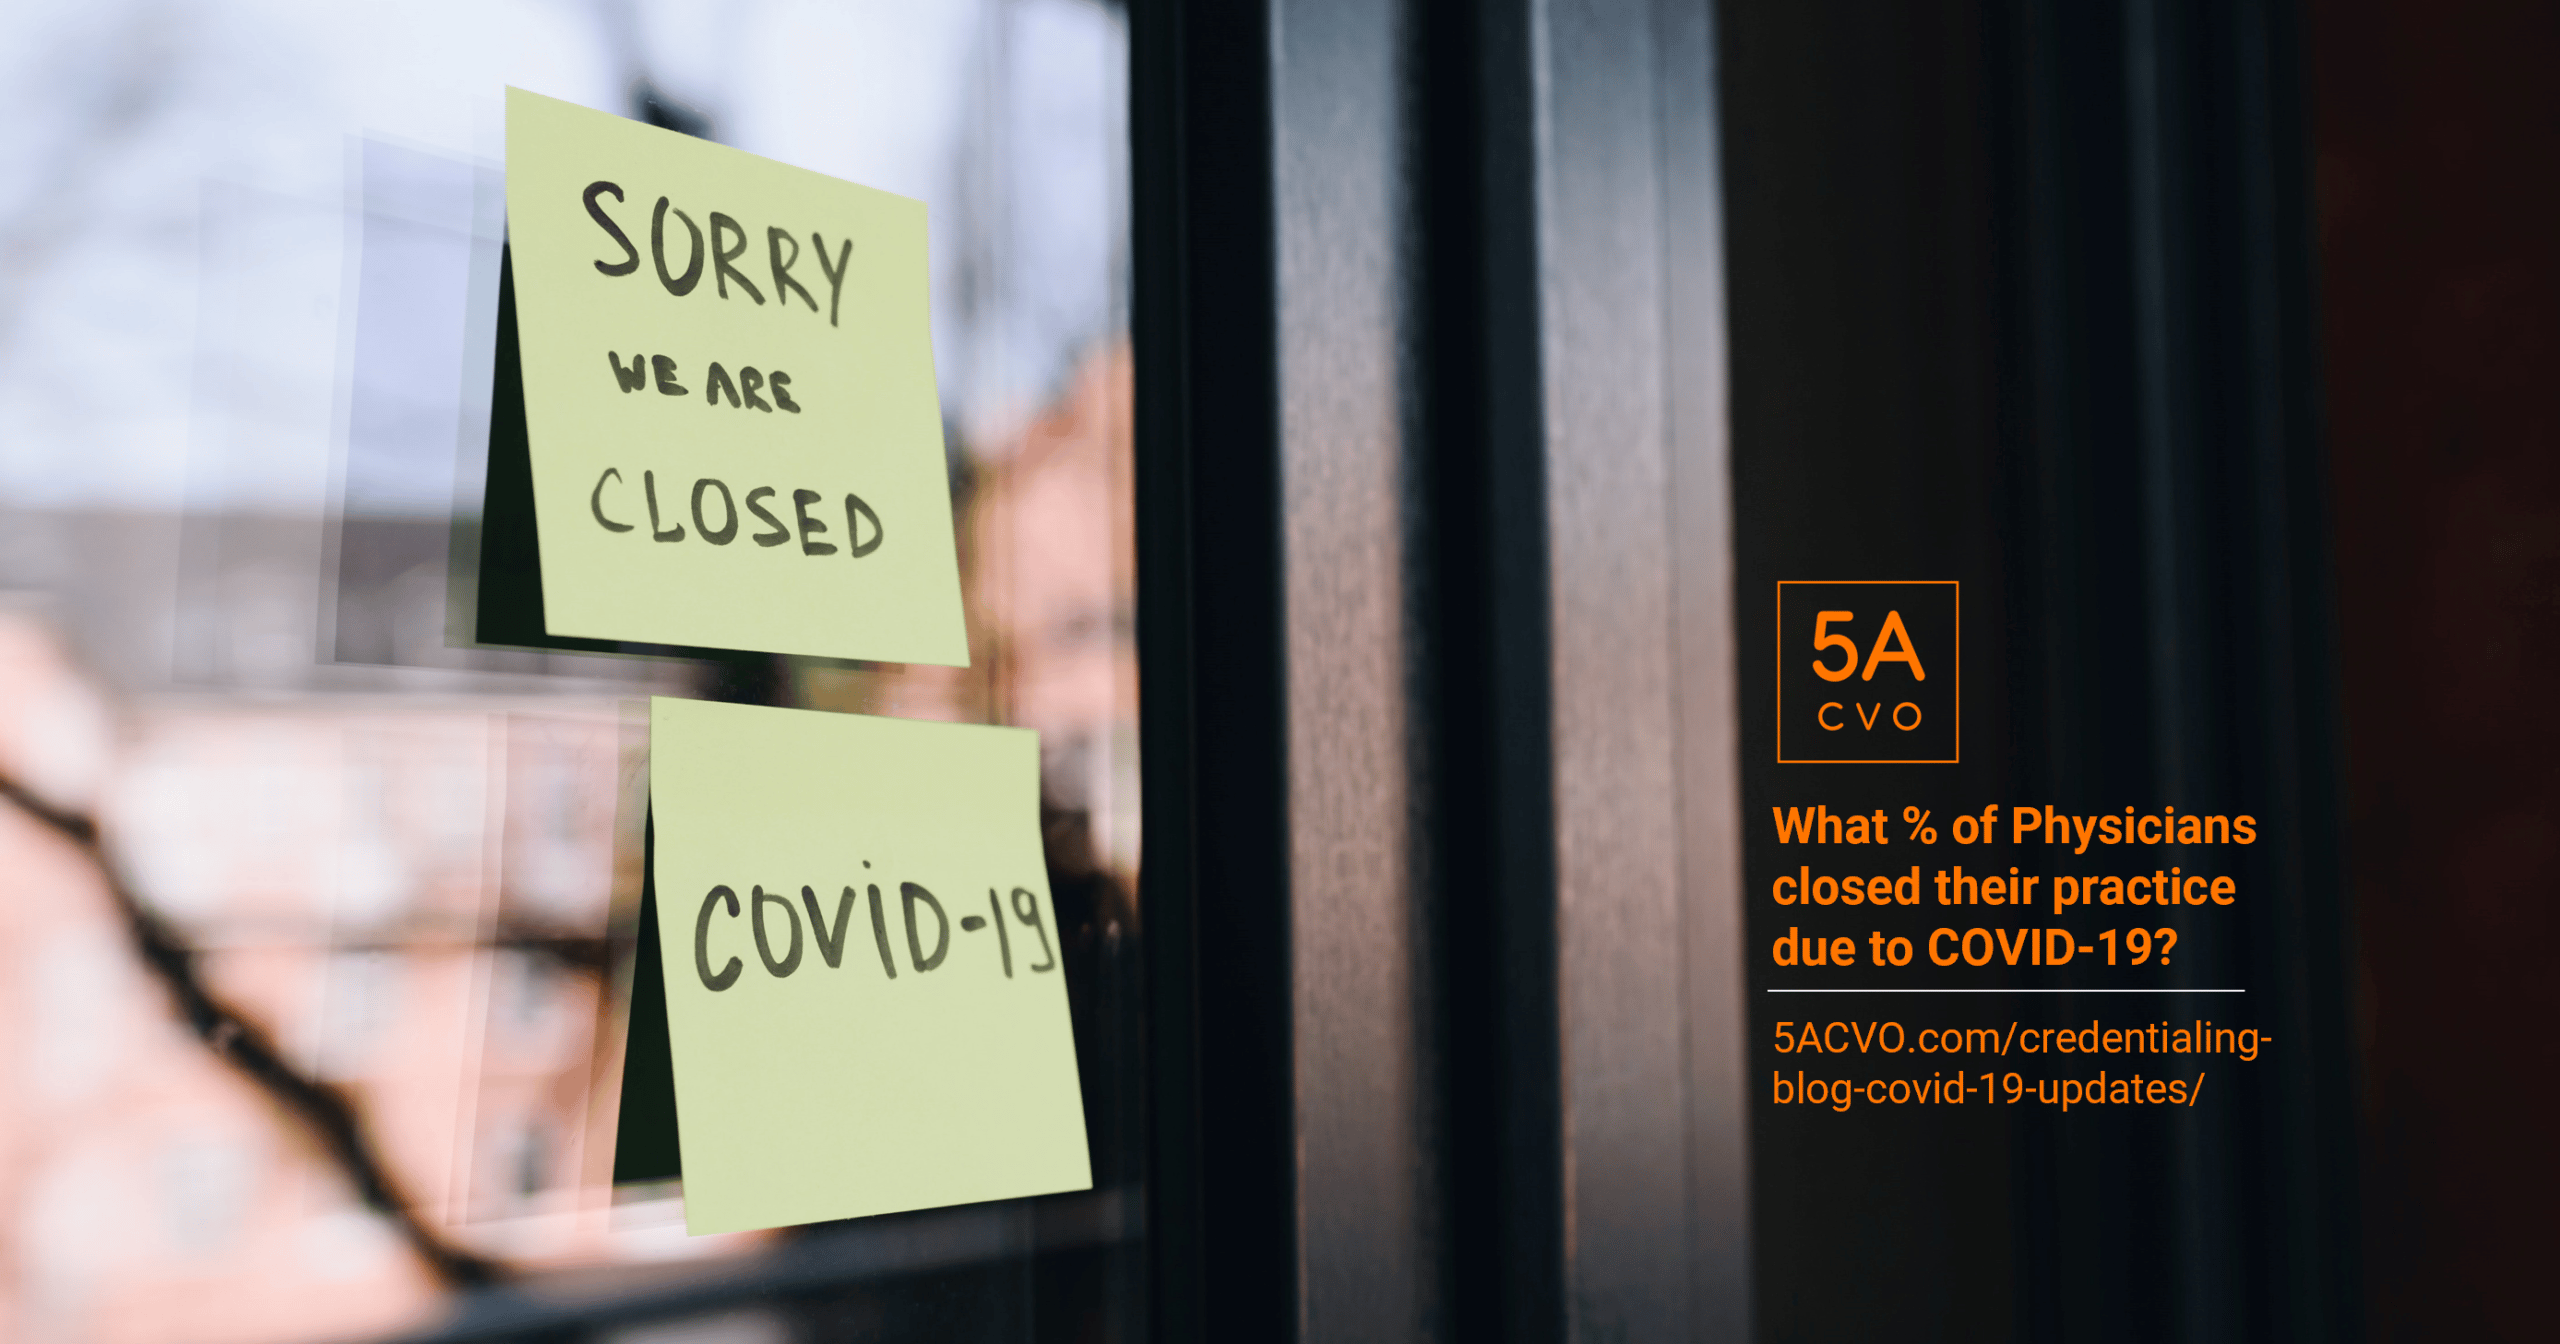 Physician Practices Have Closed Due to COVID-19